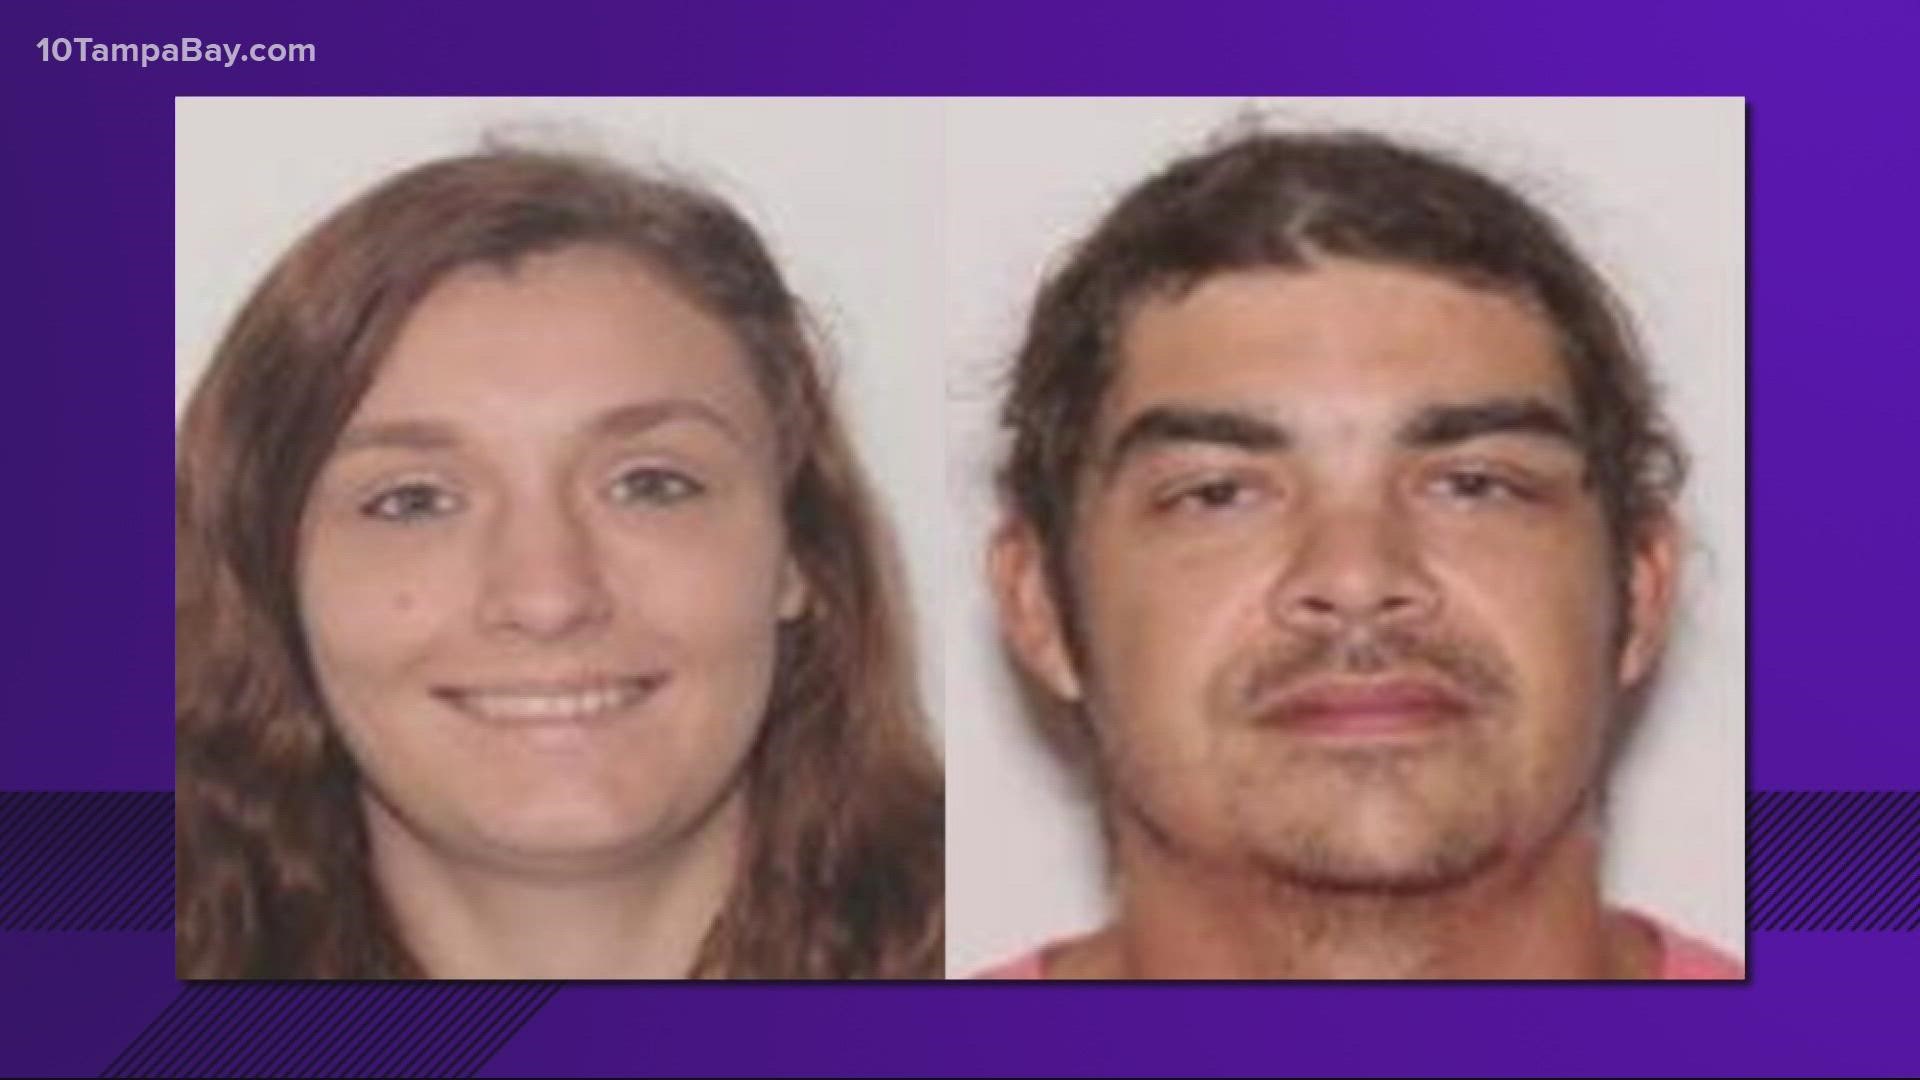 The two, who do not have custody of the child, now face several charges.